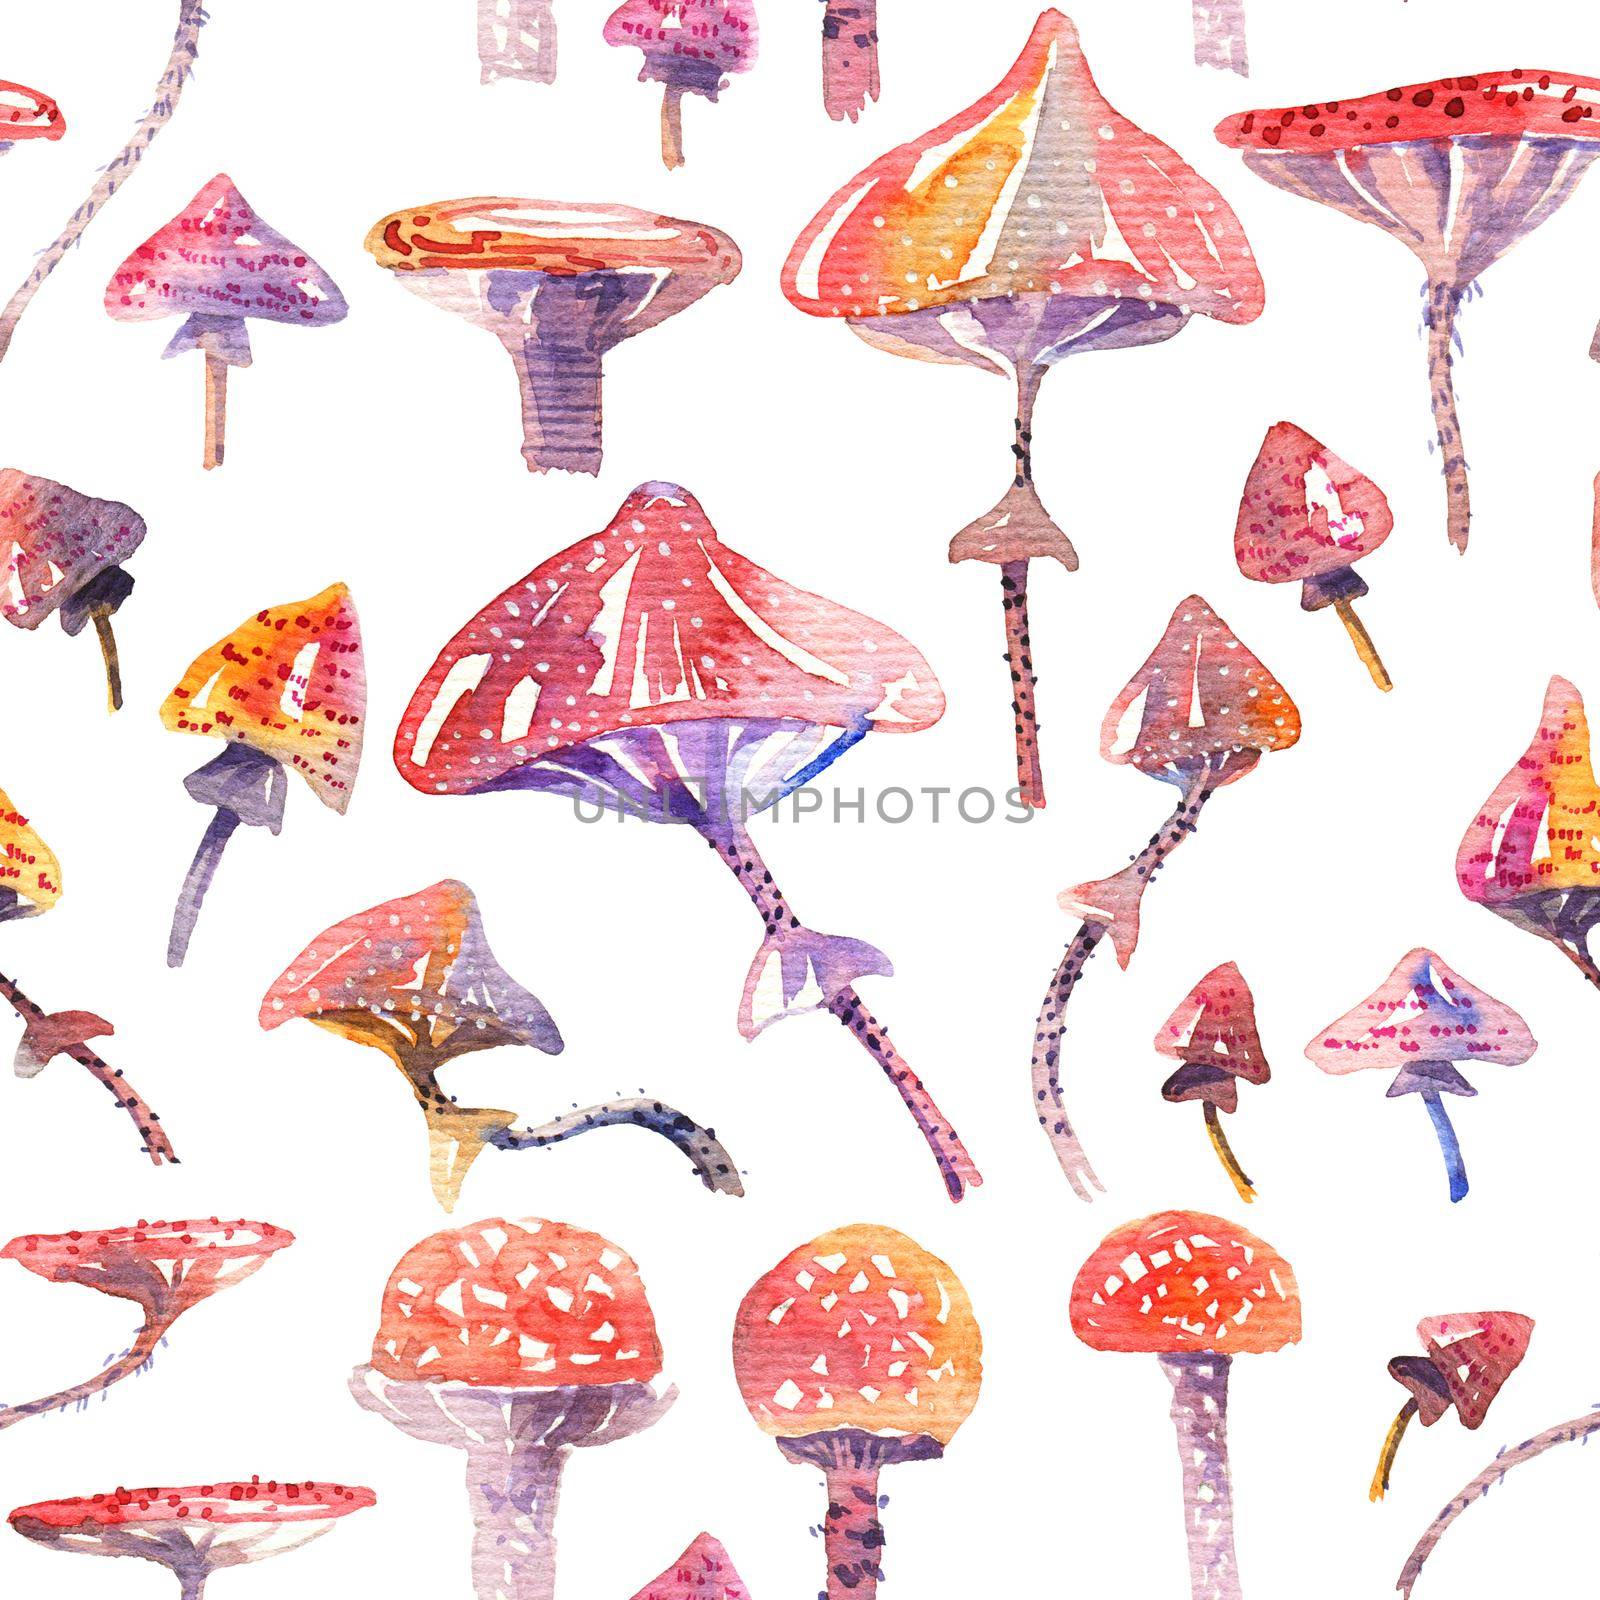 Seamless pattern with hand-drawn watercolor mushrooms, painting on white background